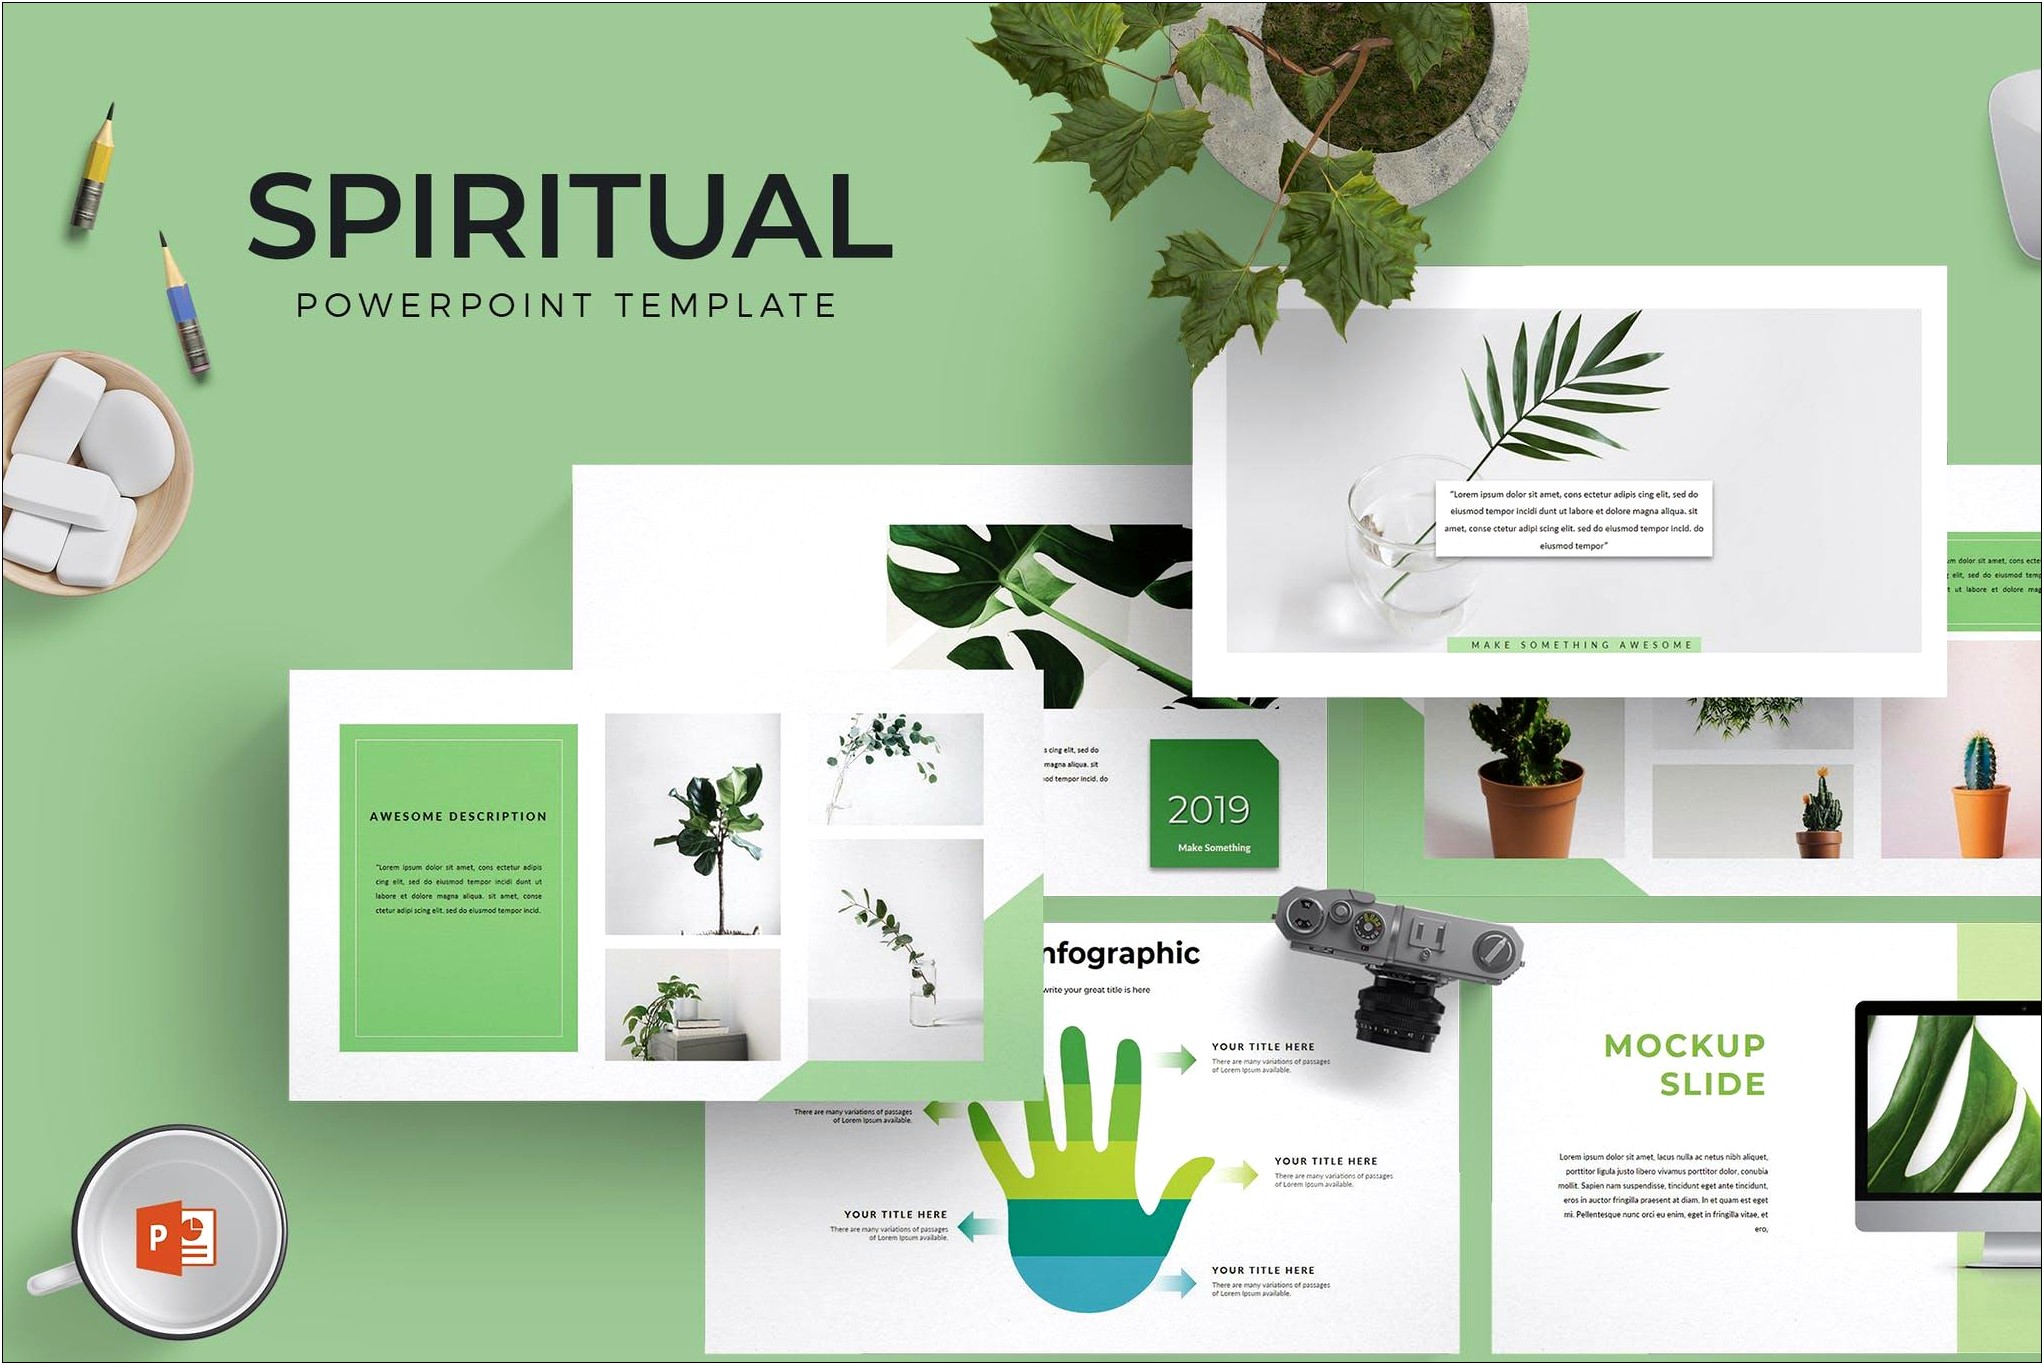 Free Powerpoint Templates For Praise And Worship